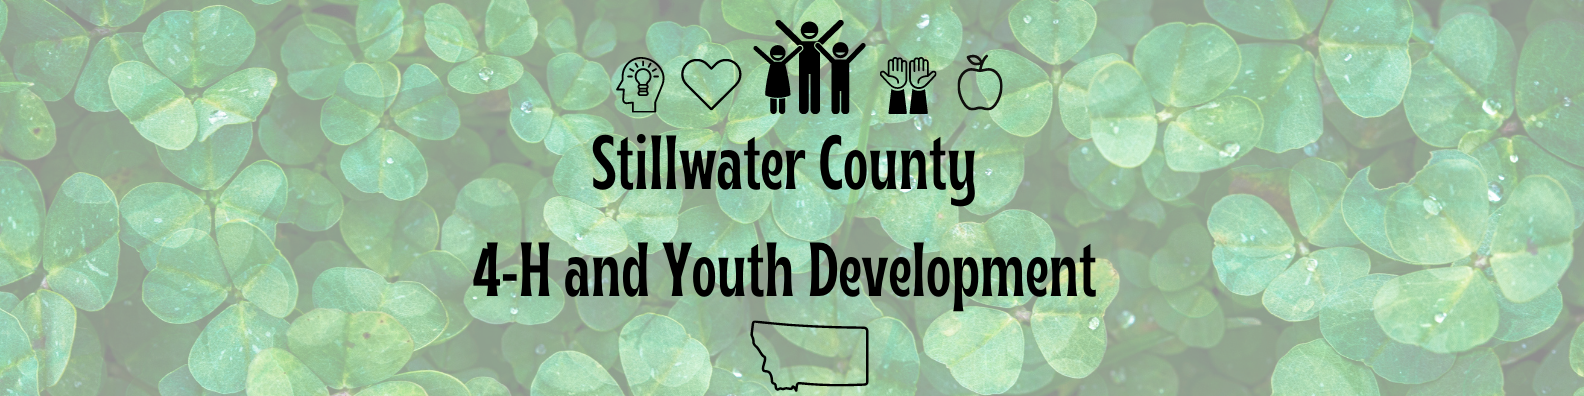 Stillwater County 4-H and Youth Development